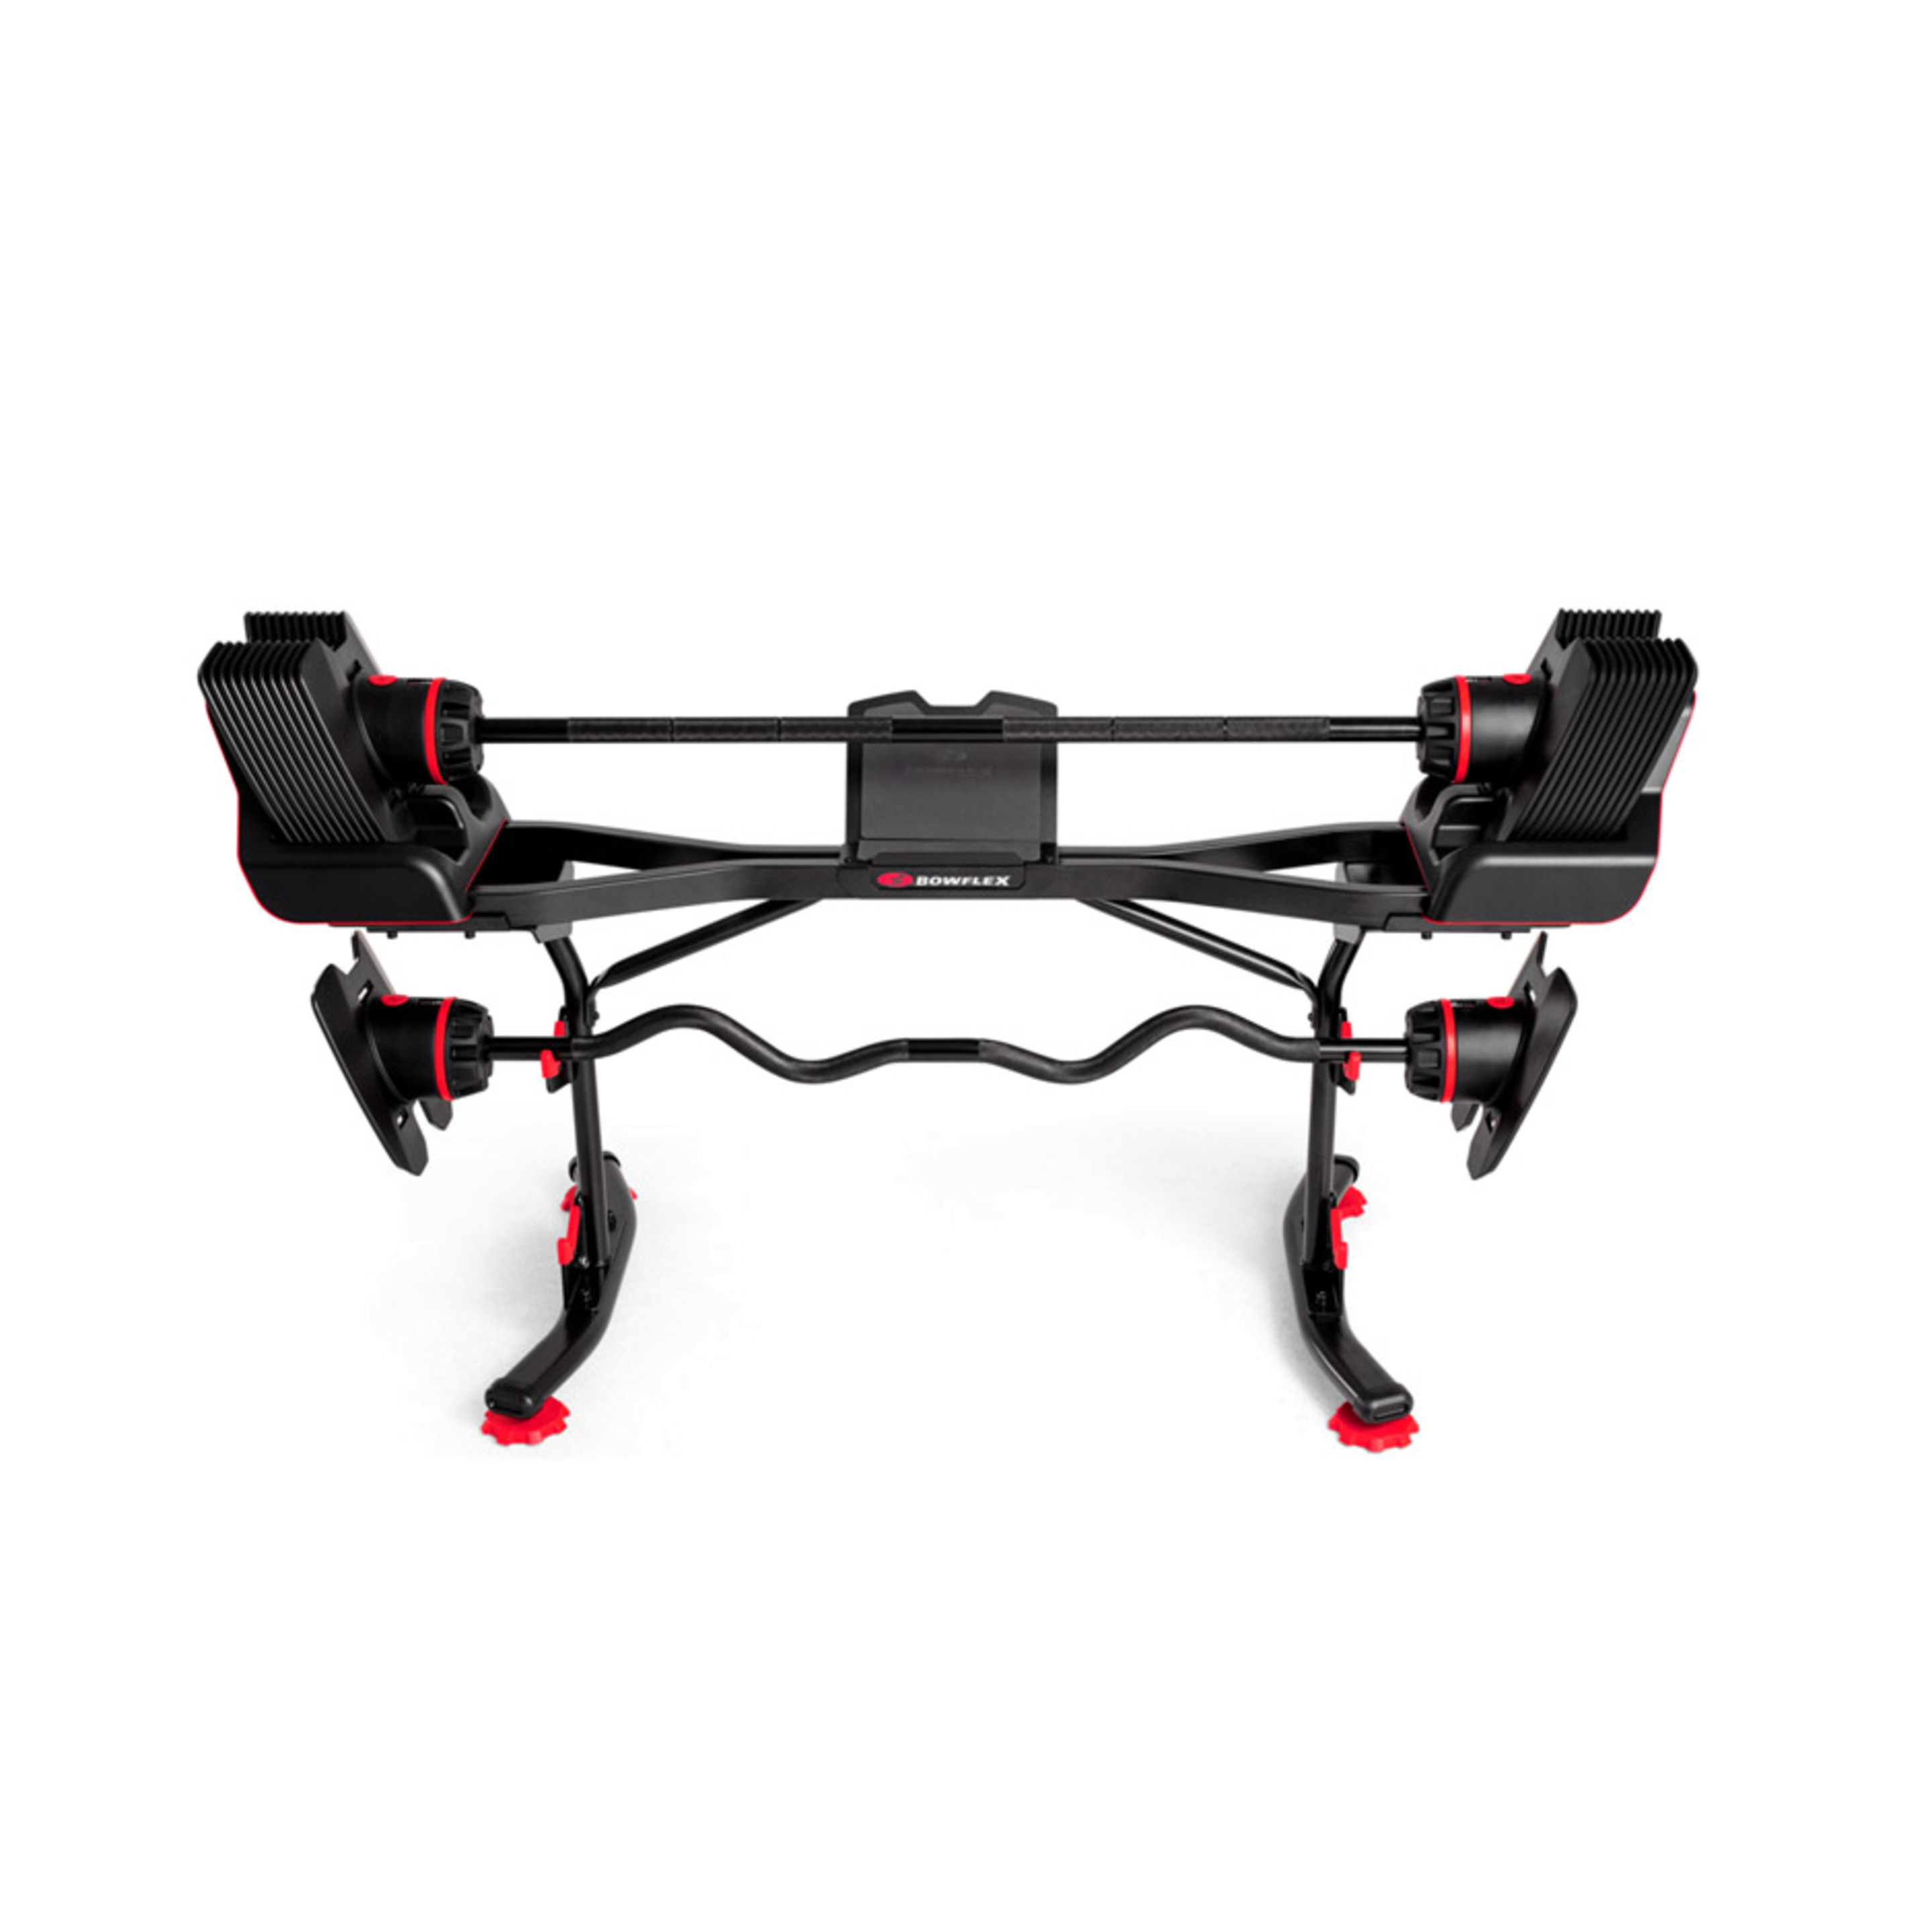 Bowflex Stand Barbell And Curlbar With Media Rack - negro - 